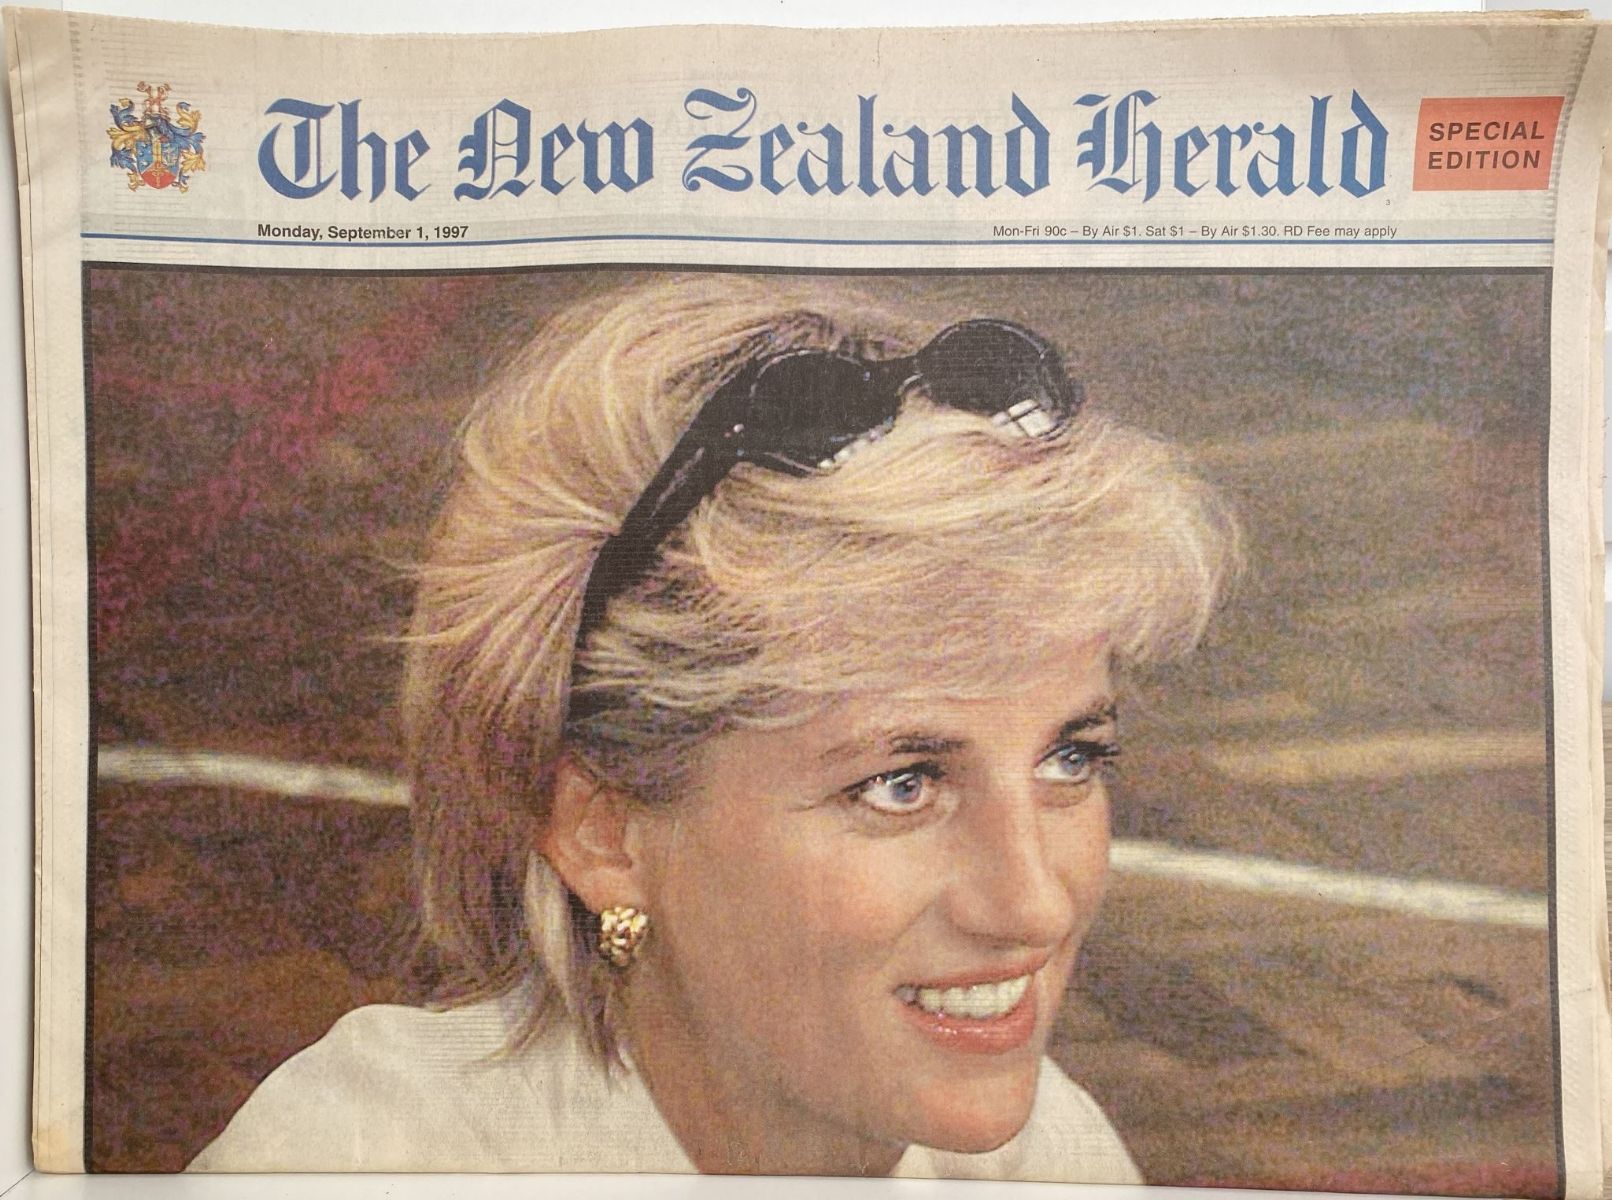 OLD NEWSPAPER: The New Zealand Herald, 1 Sept 1997 - Death of Princess Diana